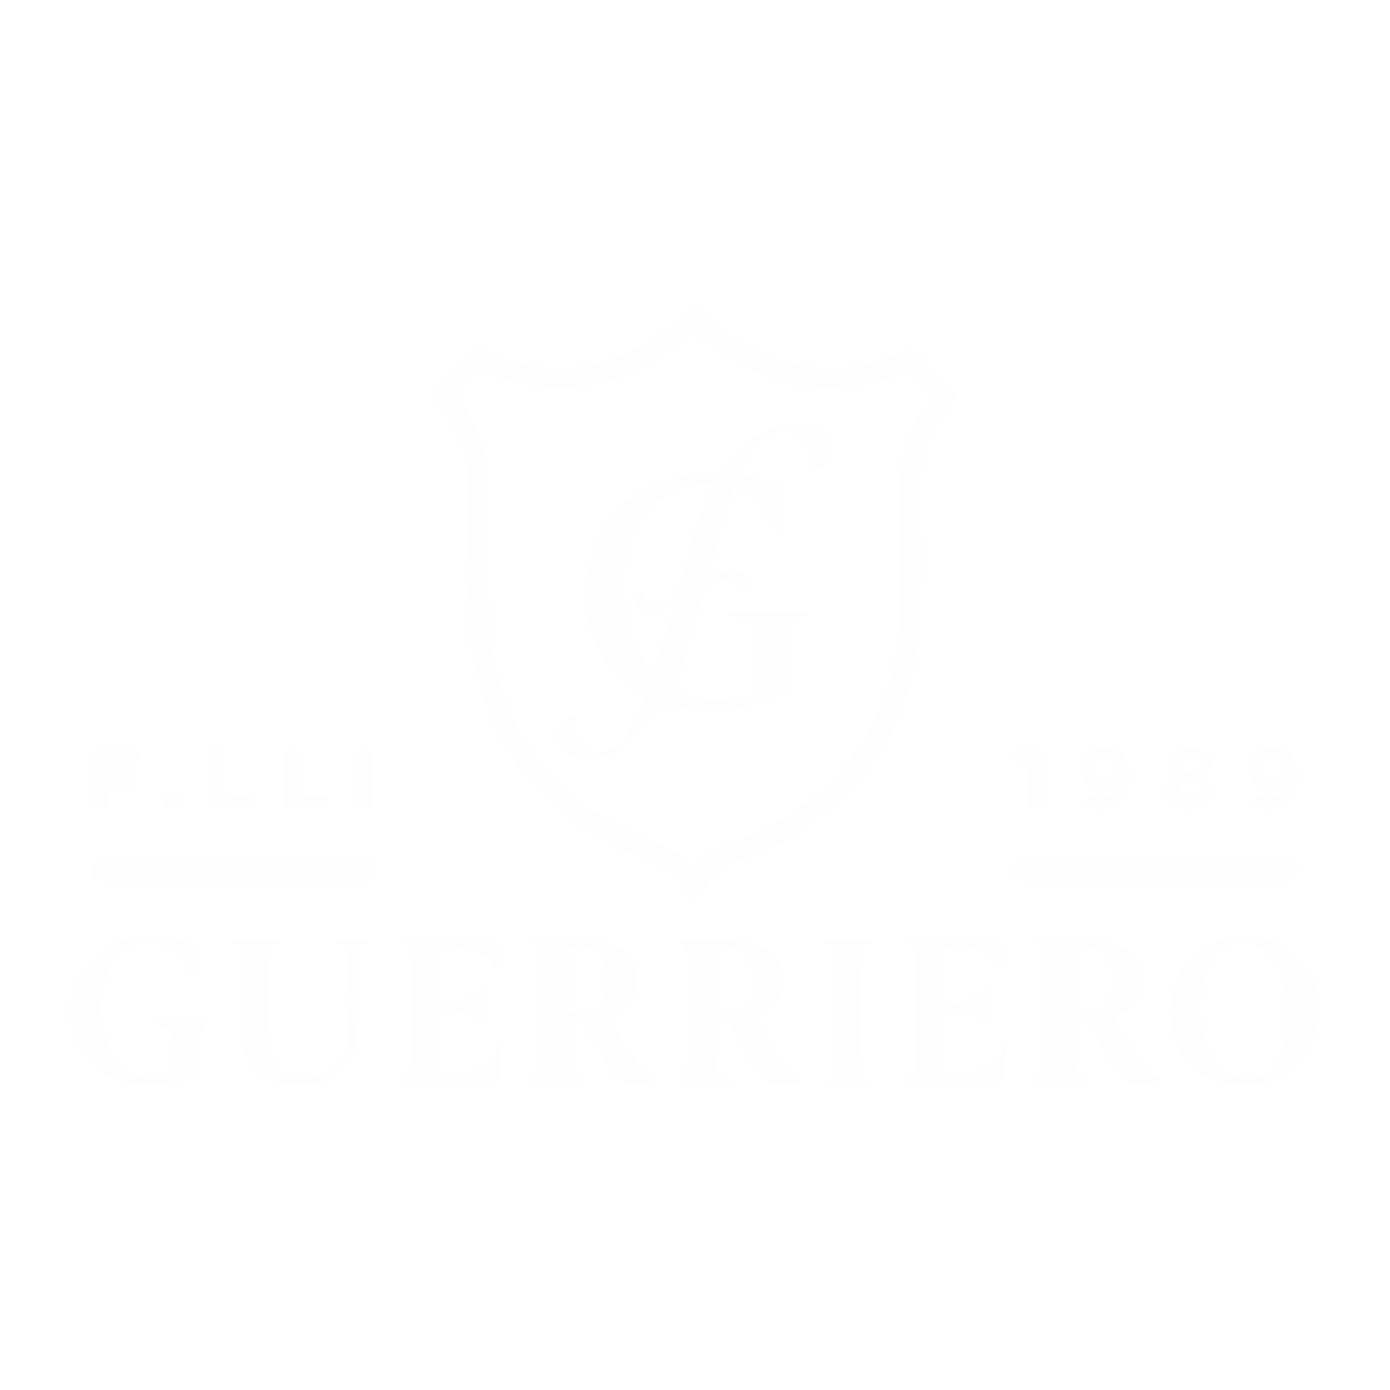 fratelli-guerriero.png